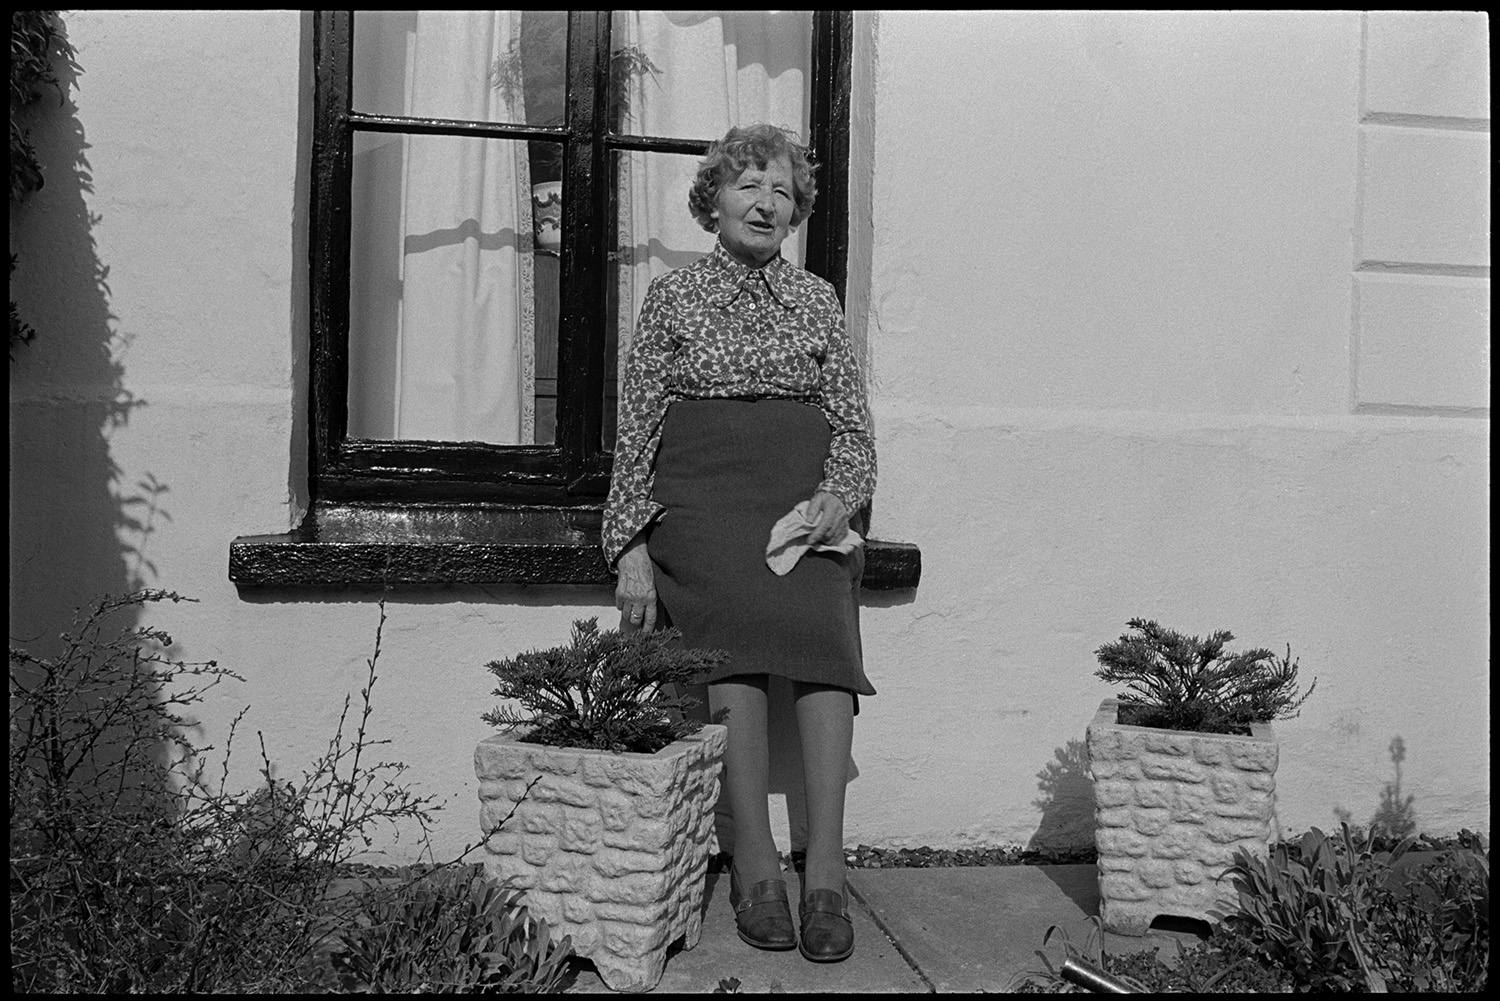 Woman gardening in small patio and sitting chatting to photographer.
[Mrs Bussell sitting on a windowsill in the sunshine in her front garden in Leigh Road, Chulmleigh. Two flower pots are visible in the garden.]